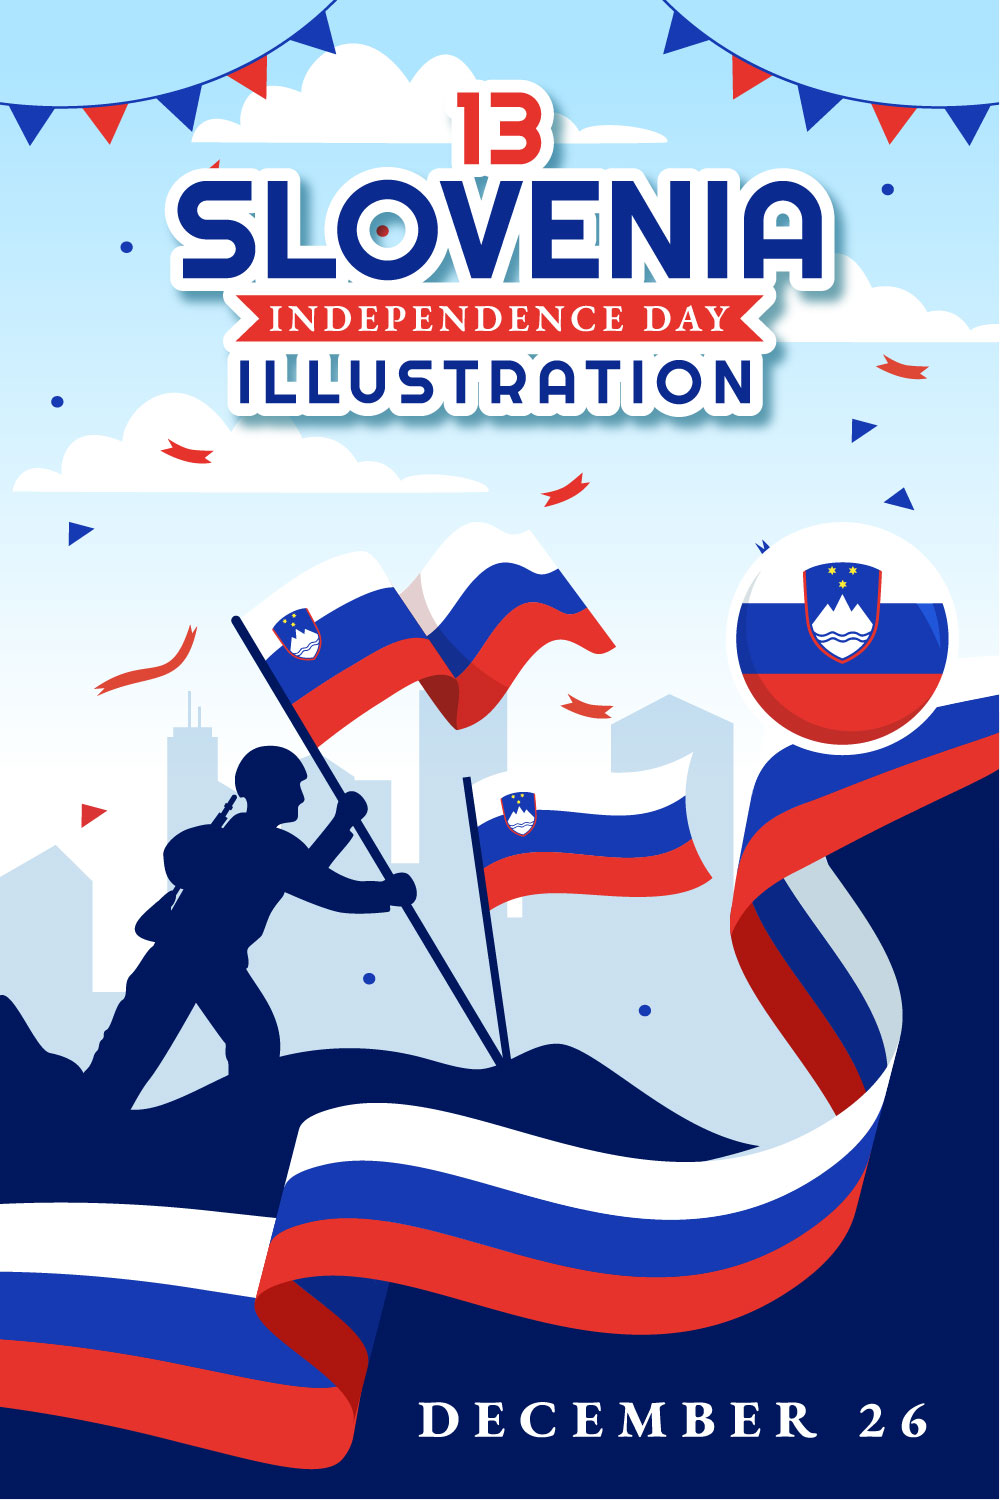 13 Slovenia Independence Day Illustration pinterest preview image.